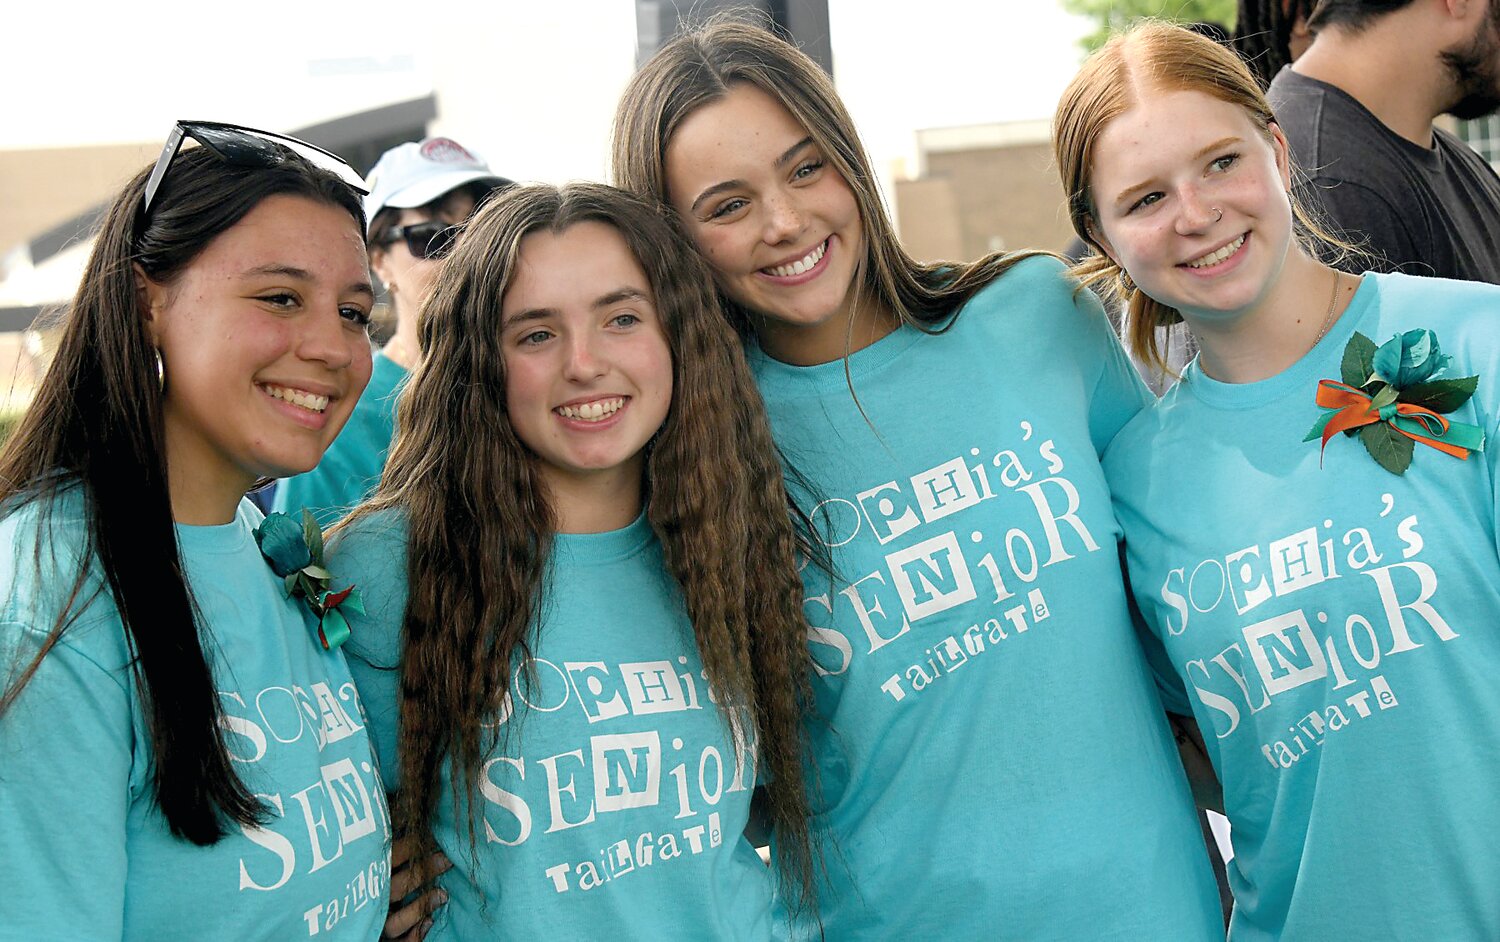 Julianna Pasquarella, Sophia’s sister, third from left, enjoys music and conversation with friends, from left, Sarah Brown, Mollie Ryanowski and Abby Wodotinski.